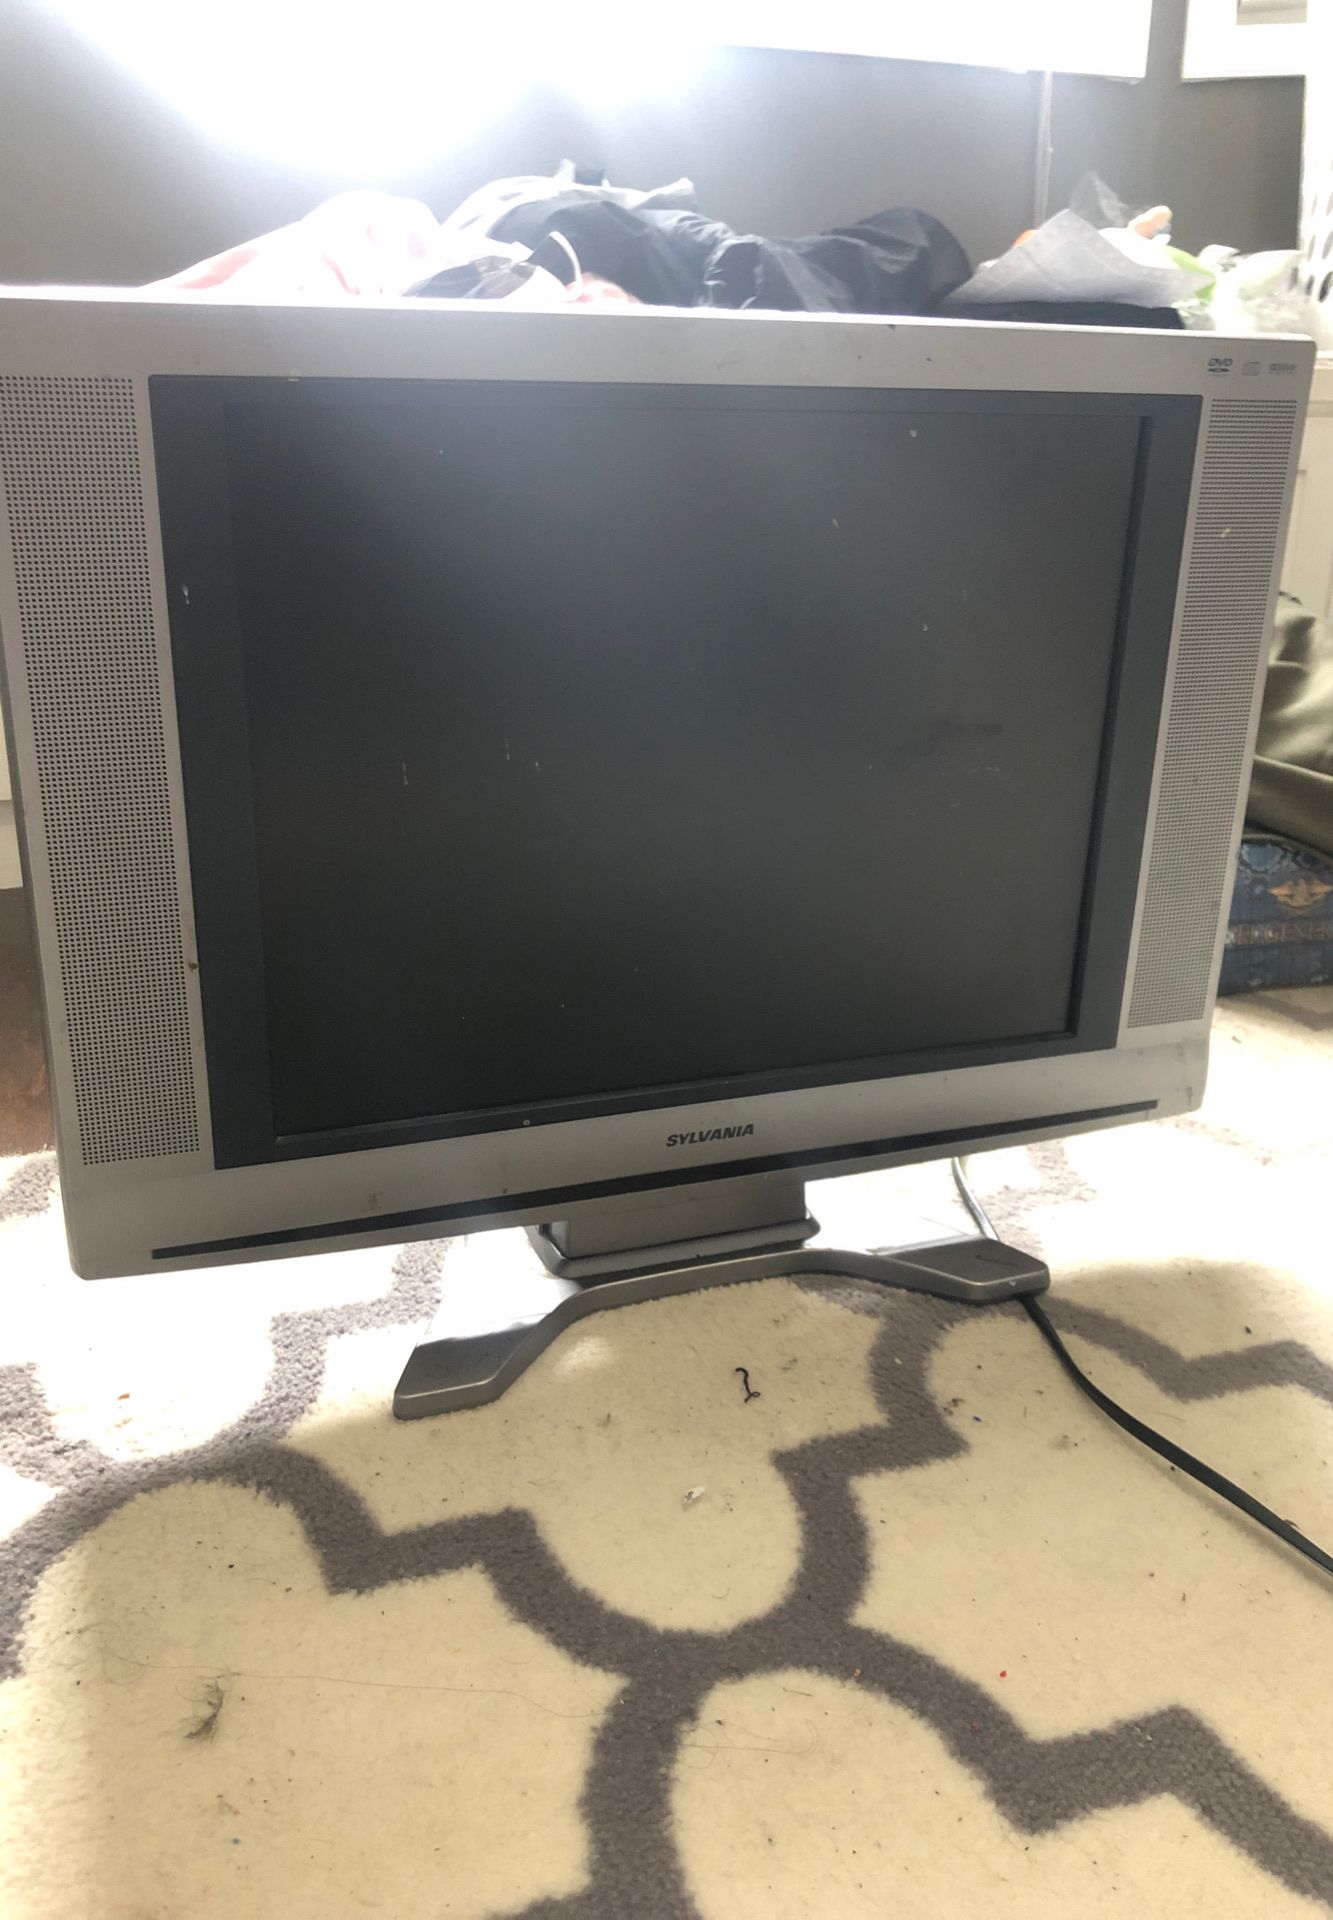 Sylvania tv with built in dvd